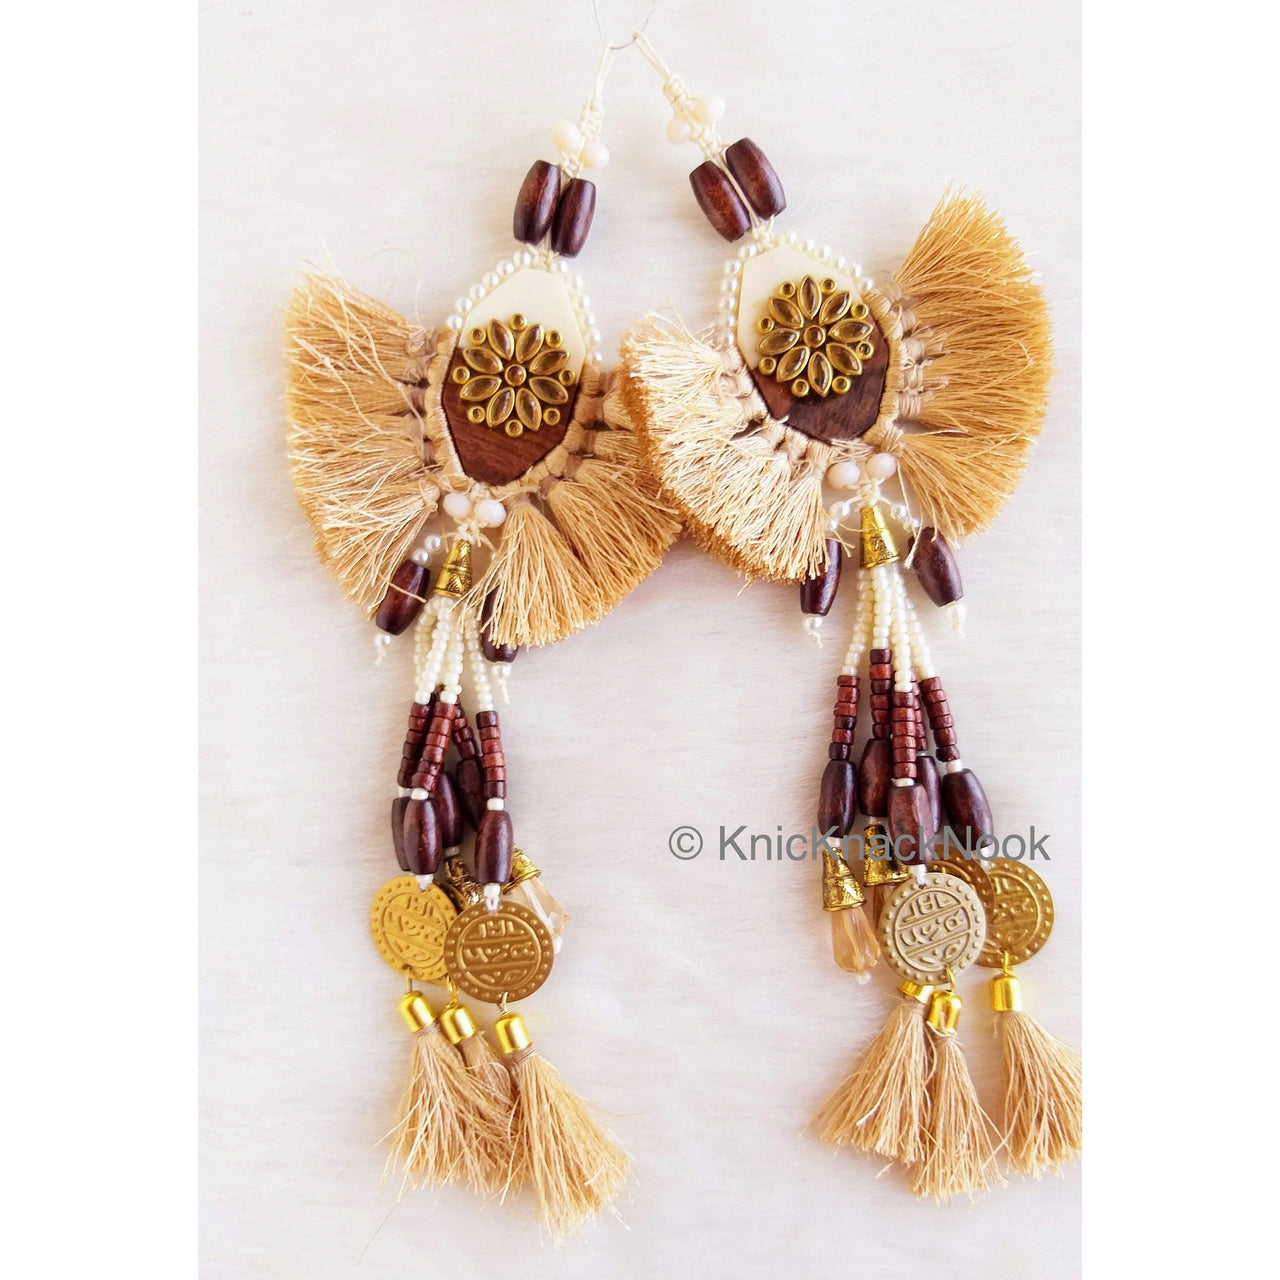 Beige Tassels With White Acrylic And Brown Wood Button In Kundan Stones, Wood Beads, Pearls